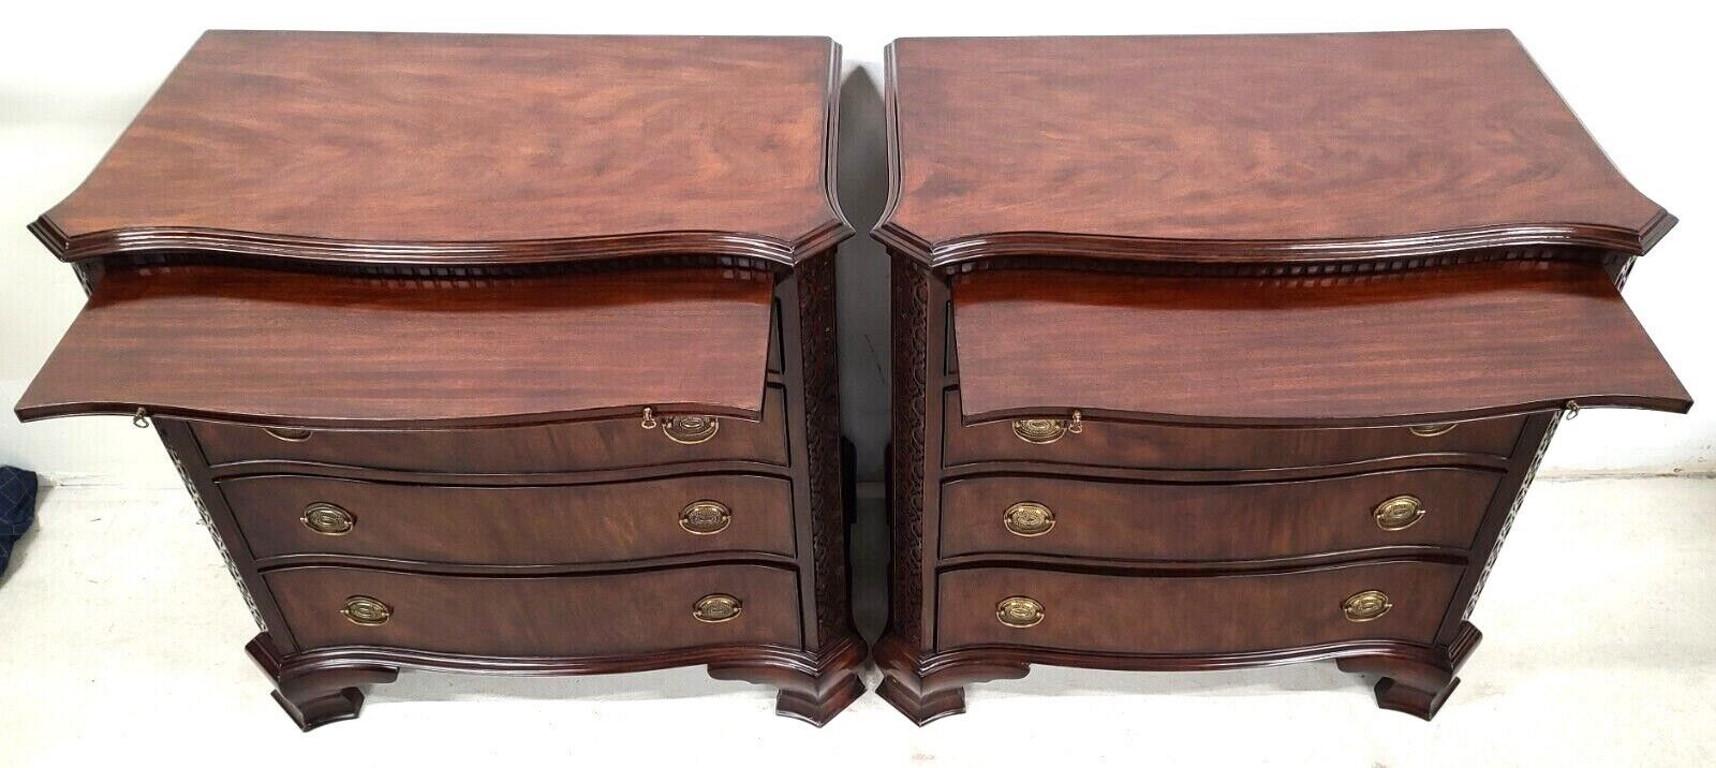 Offering One Of Our Recent Palm Beach Estate Fine Furniture Acquisitions Of A
Pair of Rare LLOYD BUXTON English Regency Flame Mahogany King Size Nightstands

Approximate Measurements in Inches
34